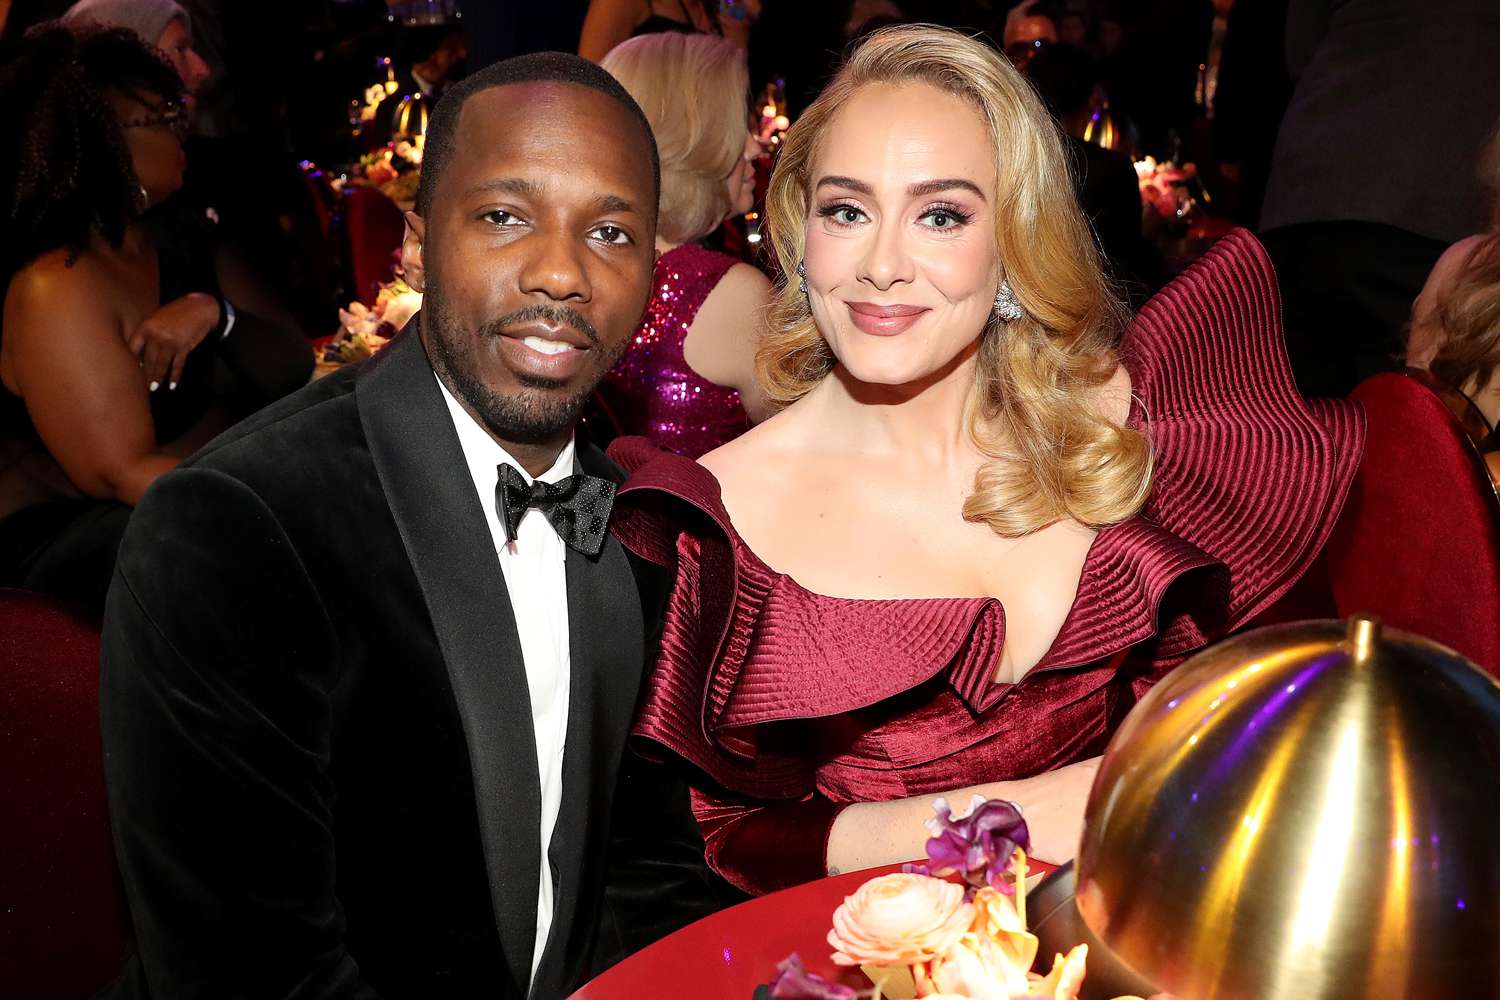 Adele May Have Just Confirmed She And Rich Paul Are Married With A Comment At A Comedy Show